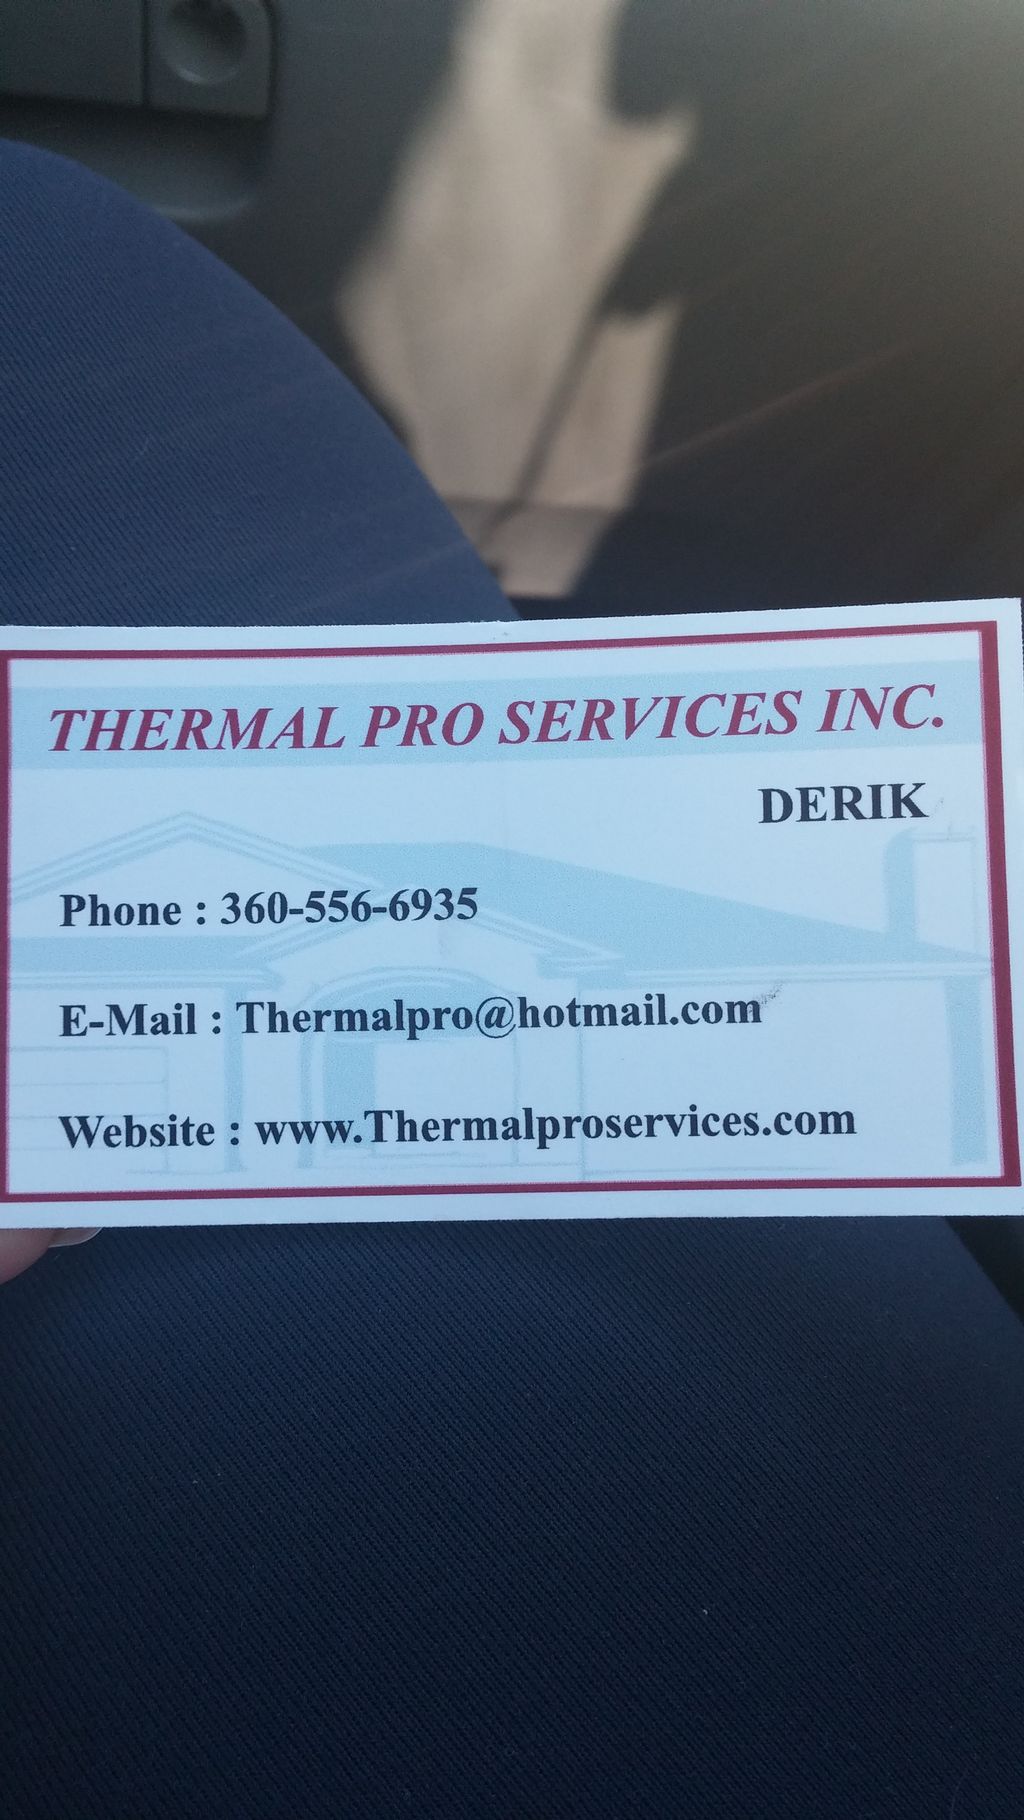 Thermal Pro Services Inc.